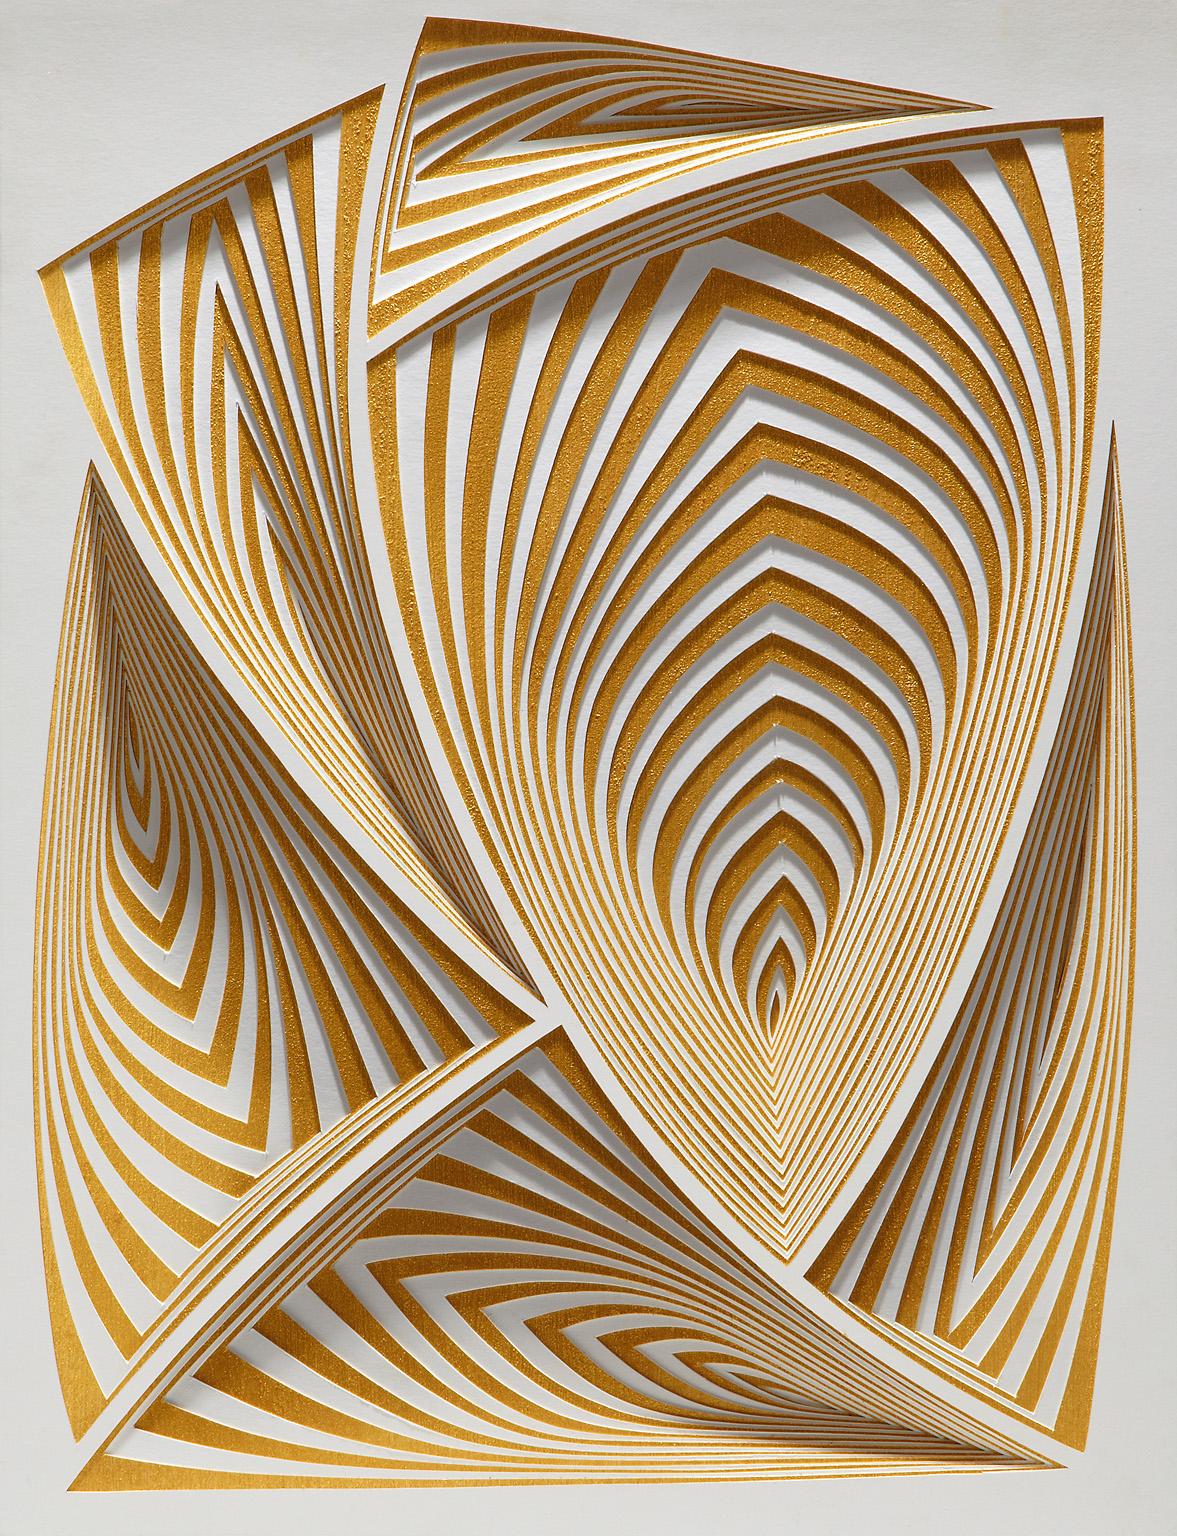 Elizabeth Gregory-Gruen Abstract Sculpture - "Gold All Over", Hand Cut Paper Wall Relief Sculpture, Abstract